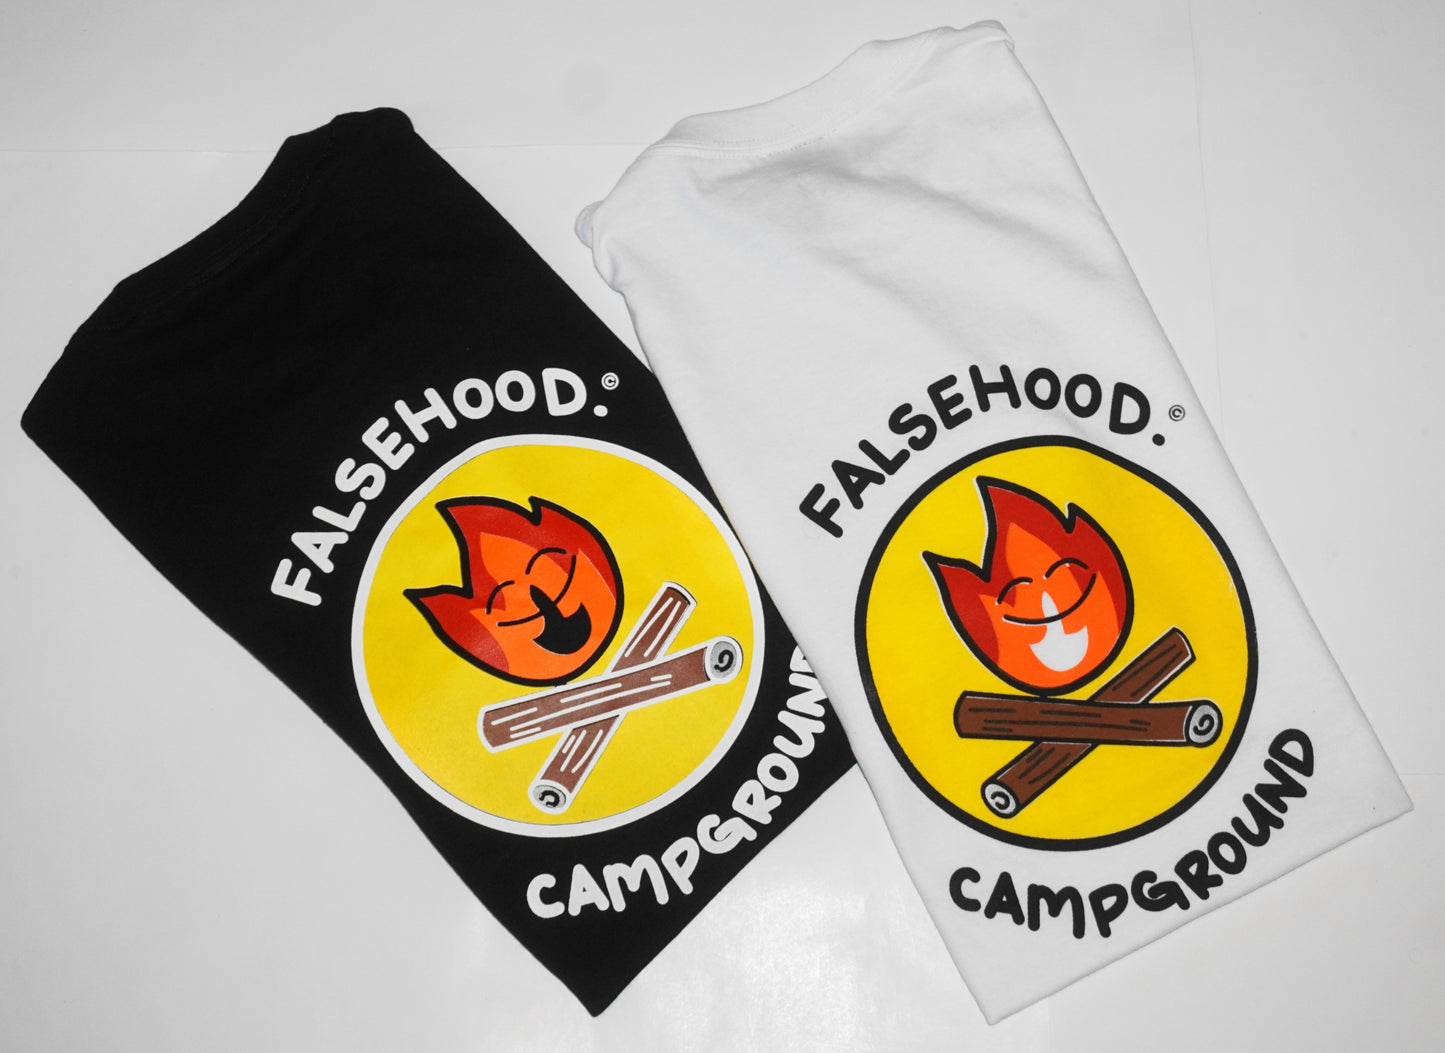 CAMPGROUND. Tee